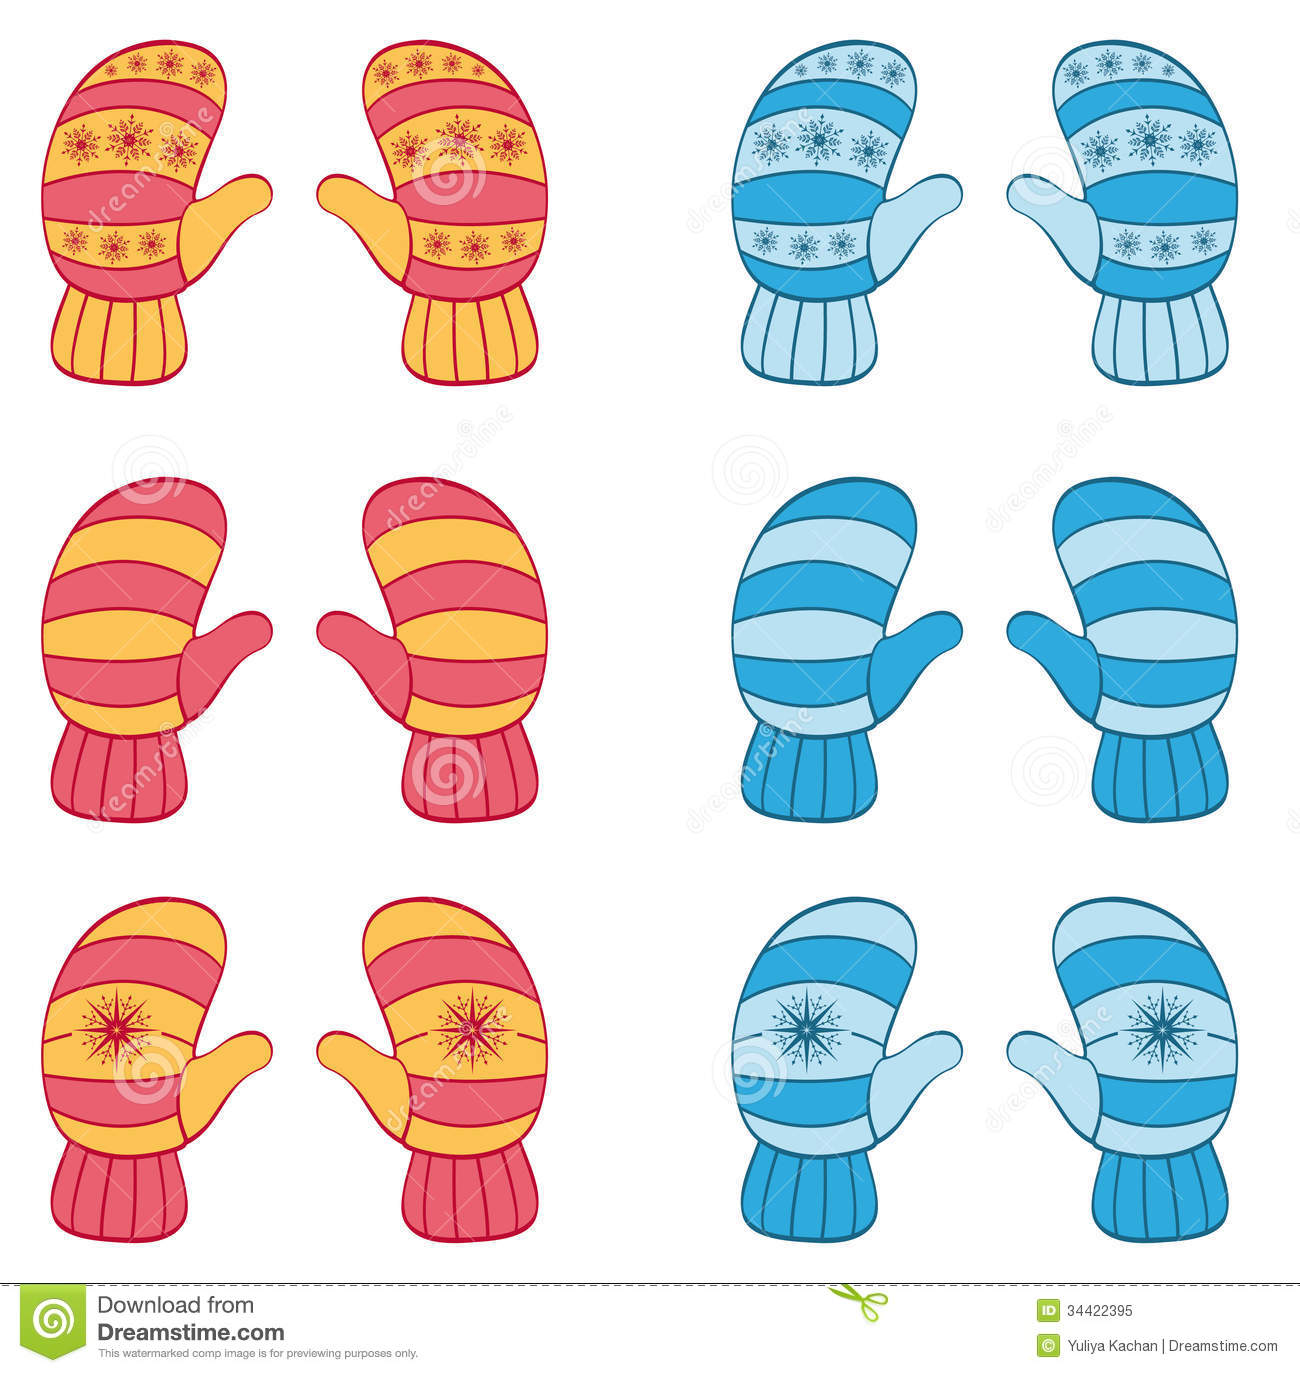 clipart of mittens - photo #40